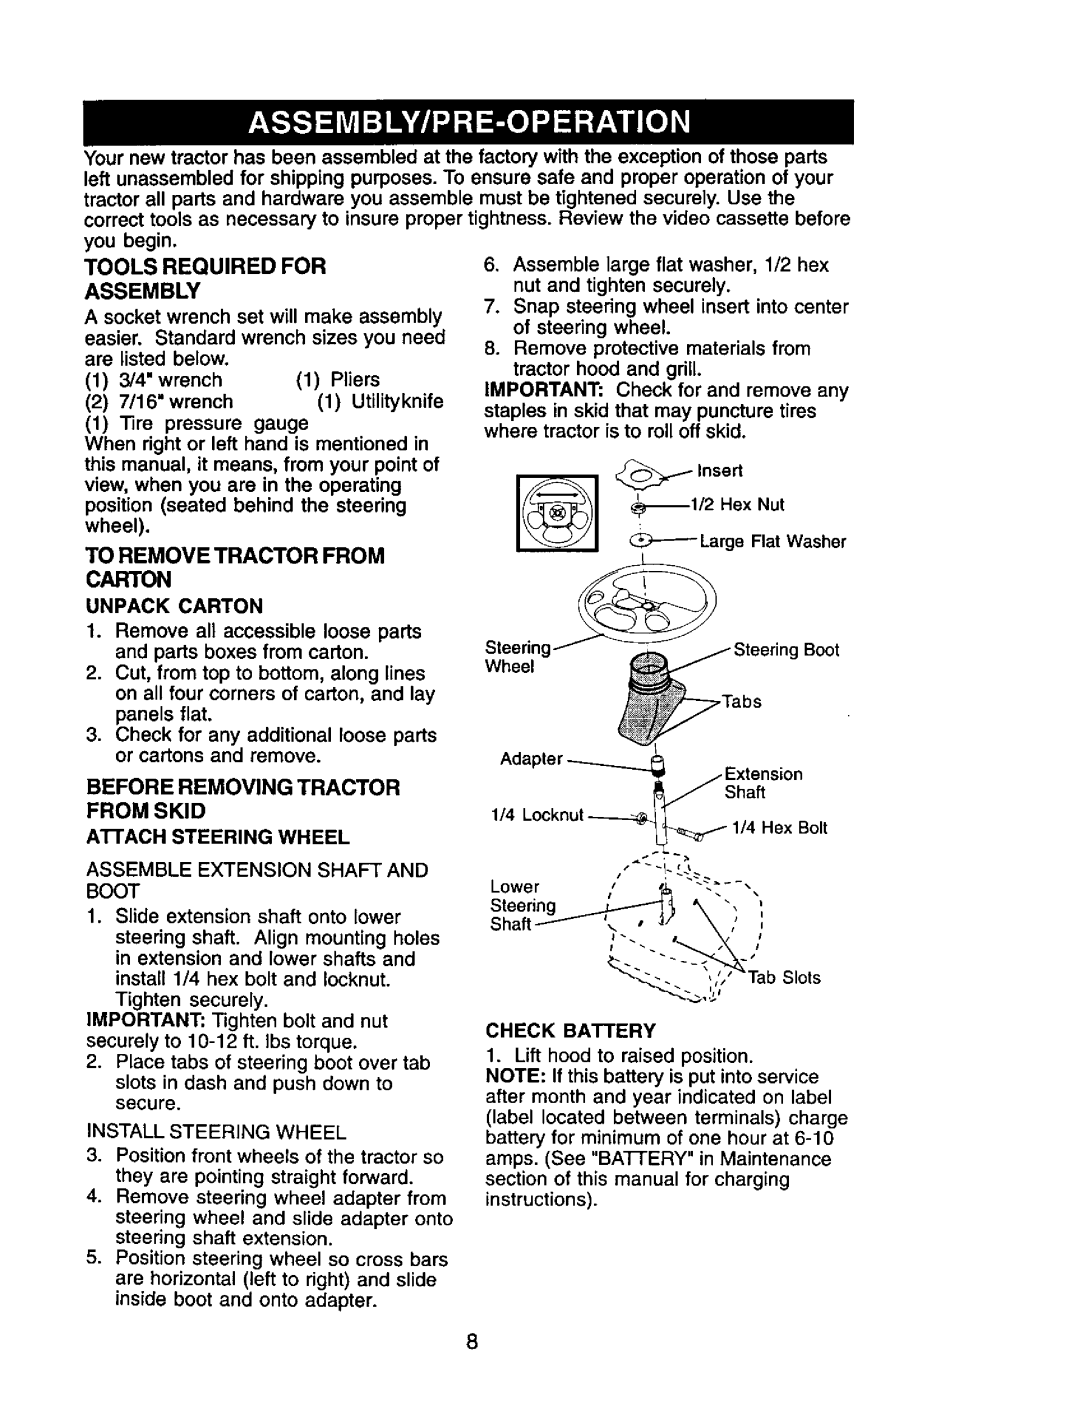 Craftsman 917.272464 owner manual To Remove Tractor From Carton 